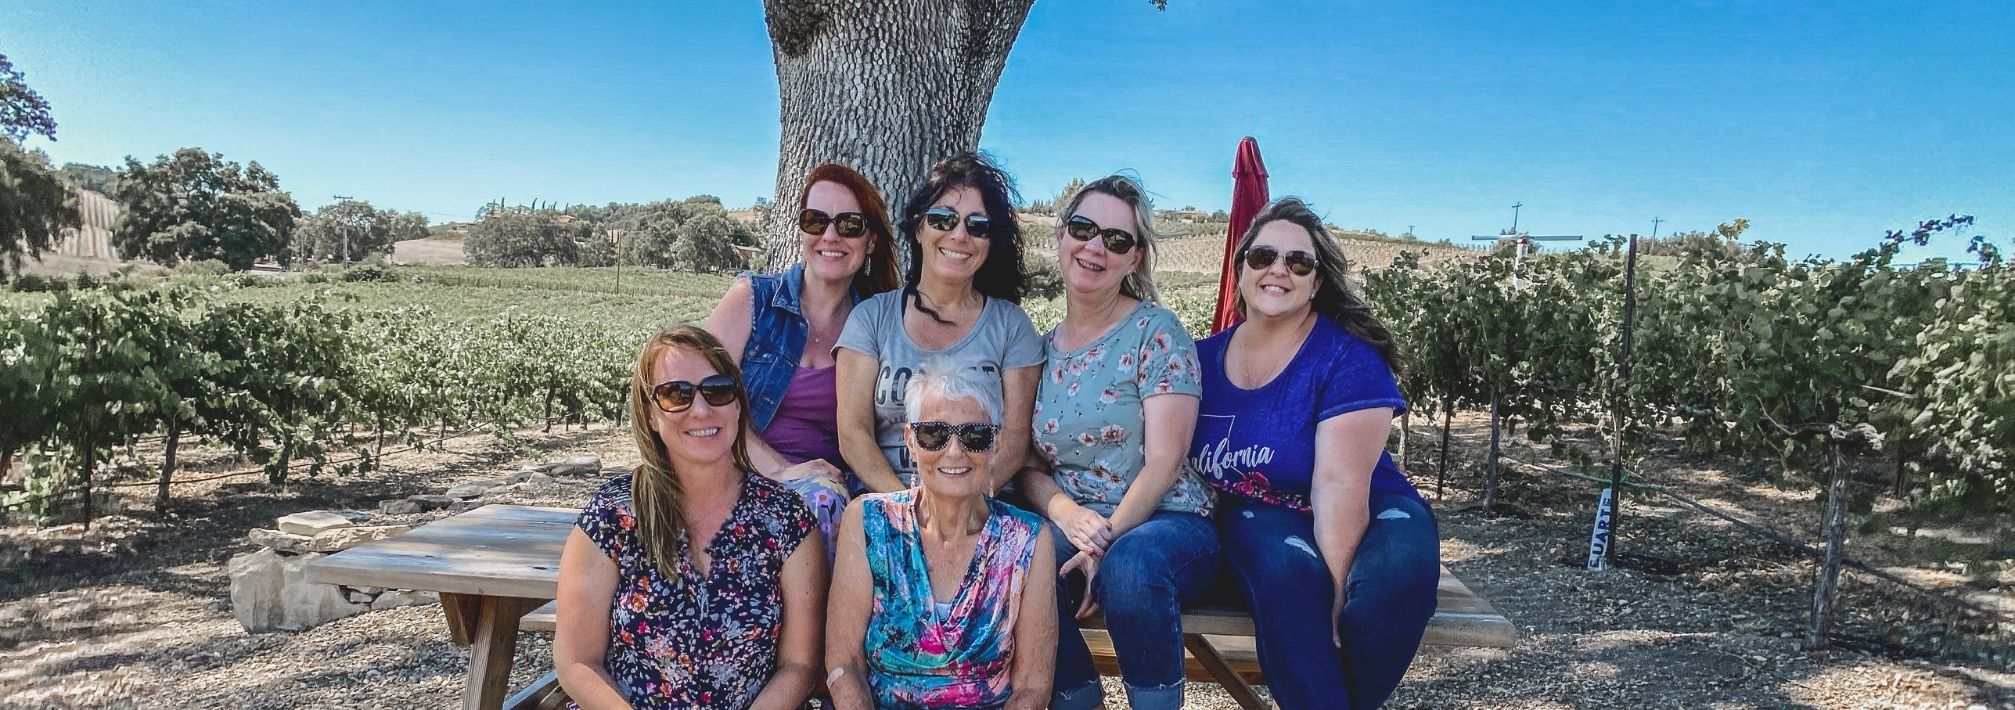 six women sitting on a picnic bench in a paso robles vineyard on a wine tour